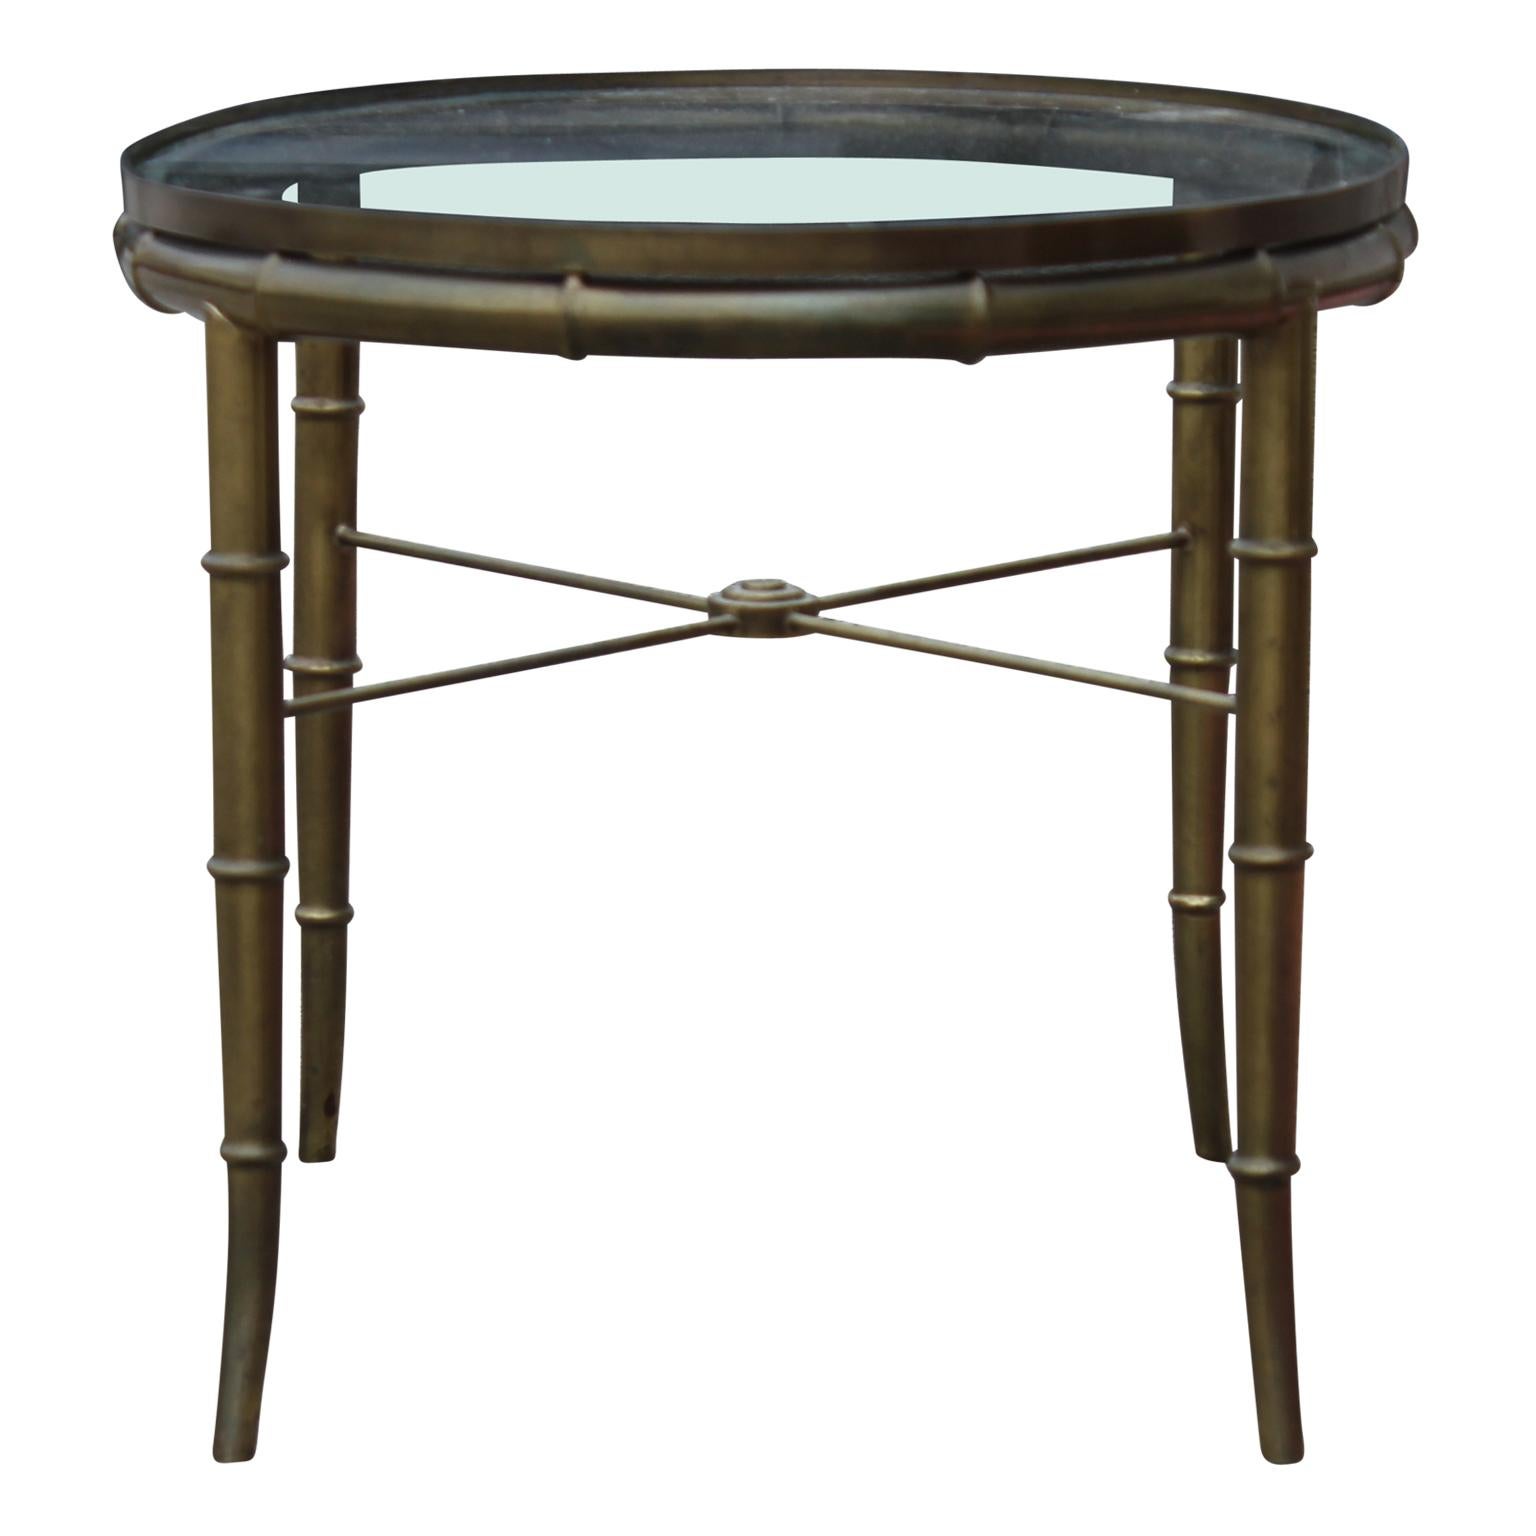 Hollywood Regency Italian Brass and Glass Oval Faux Bamboo Coffee Table 1